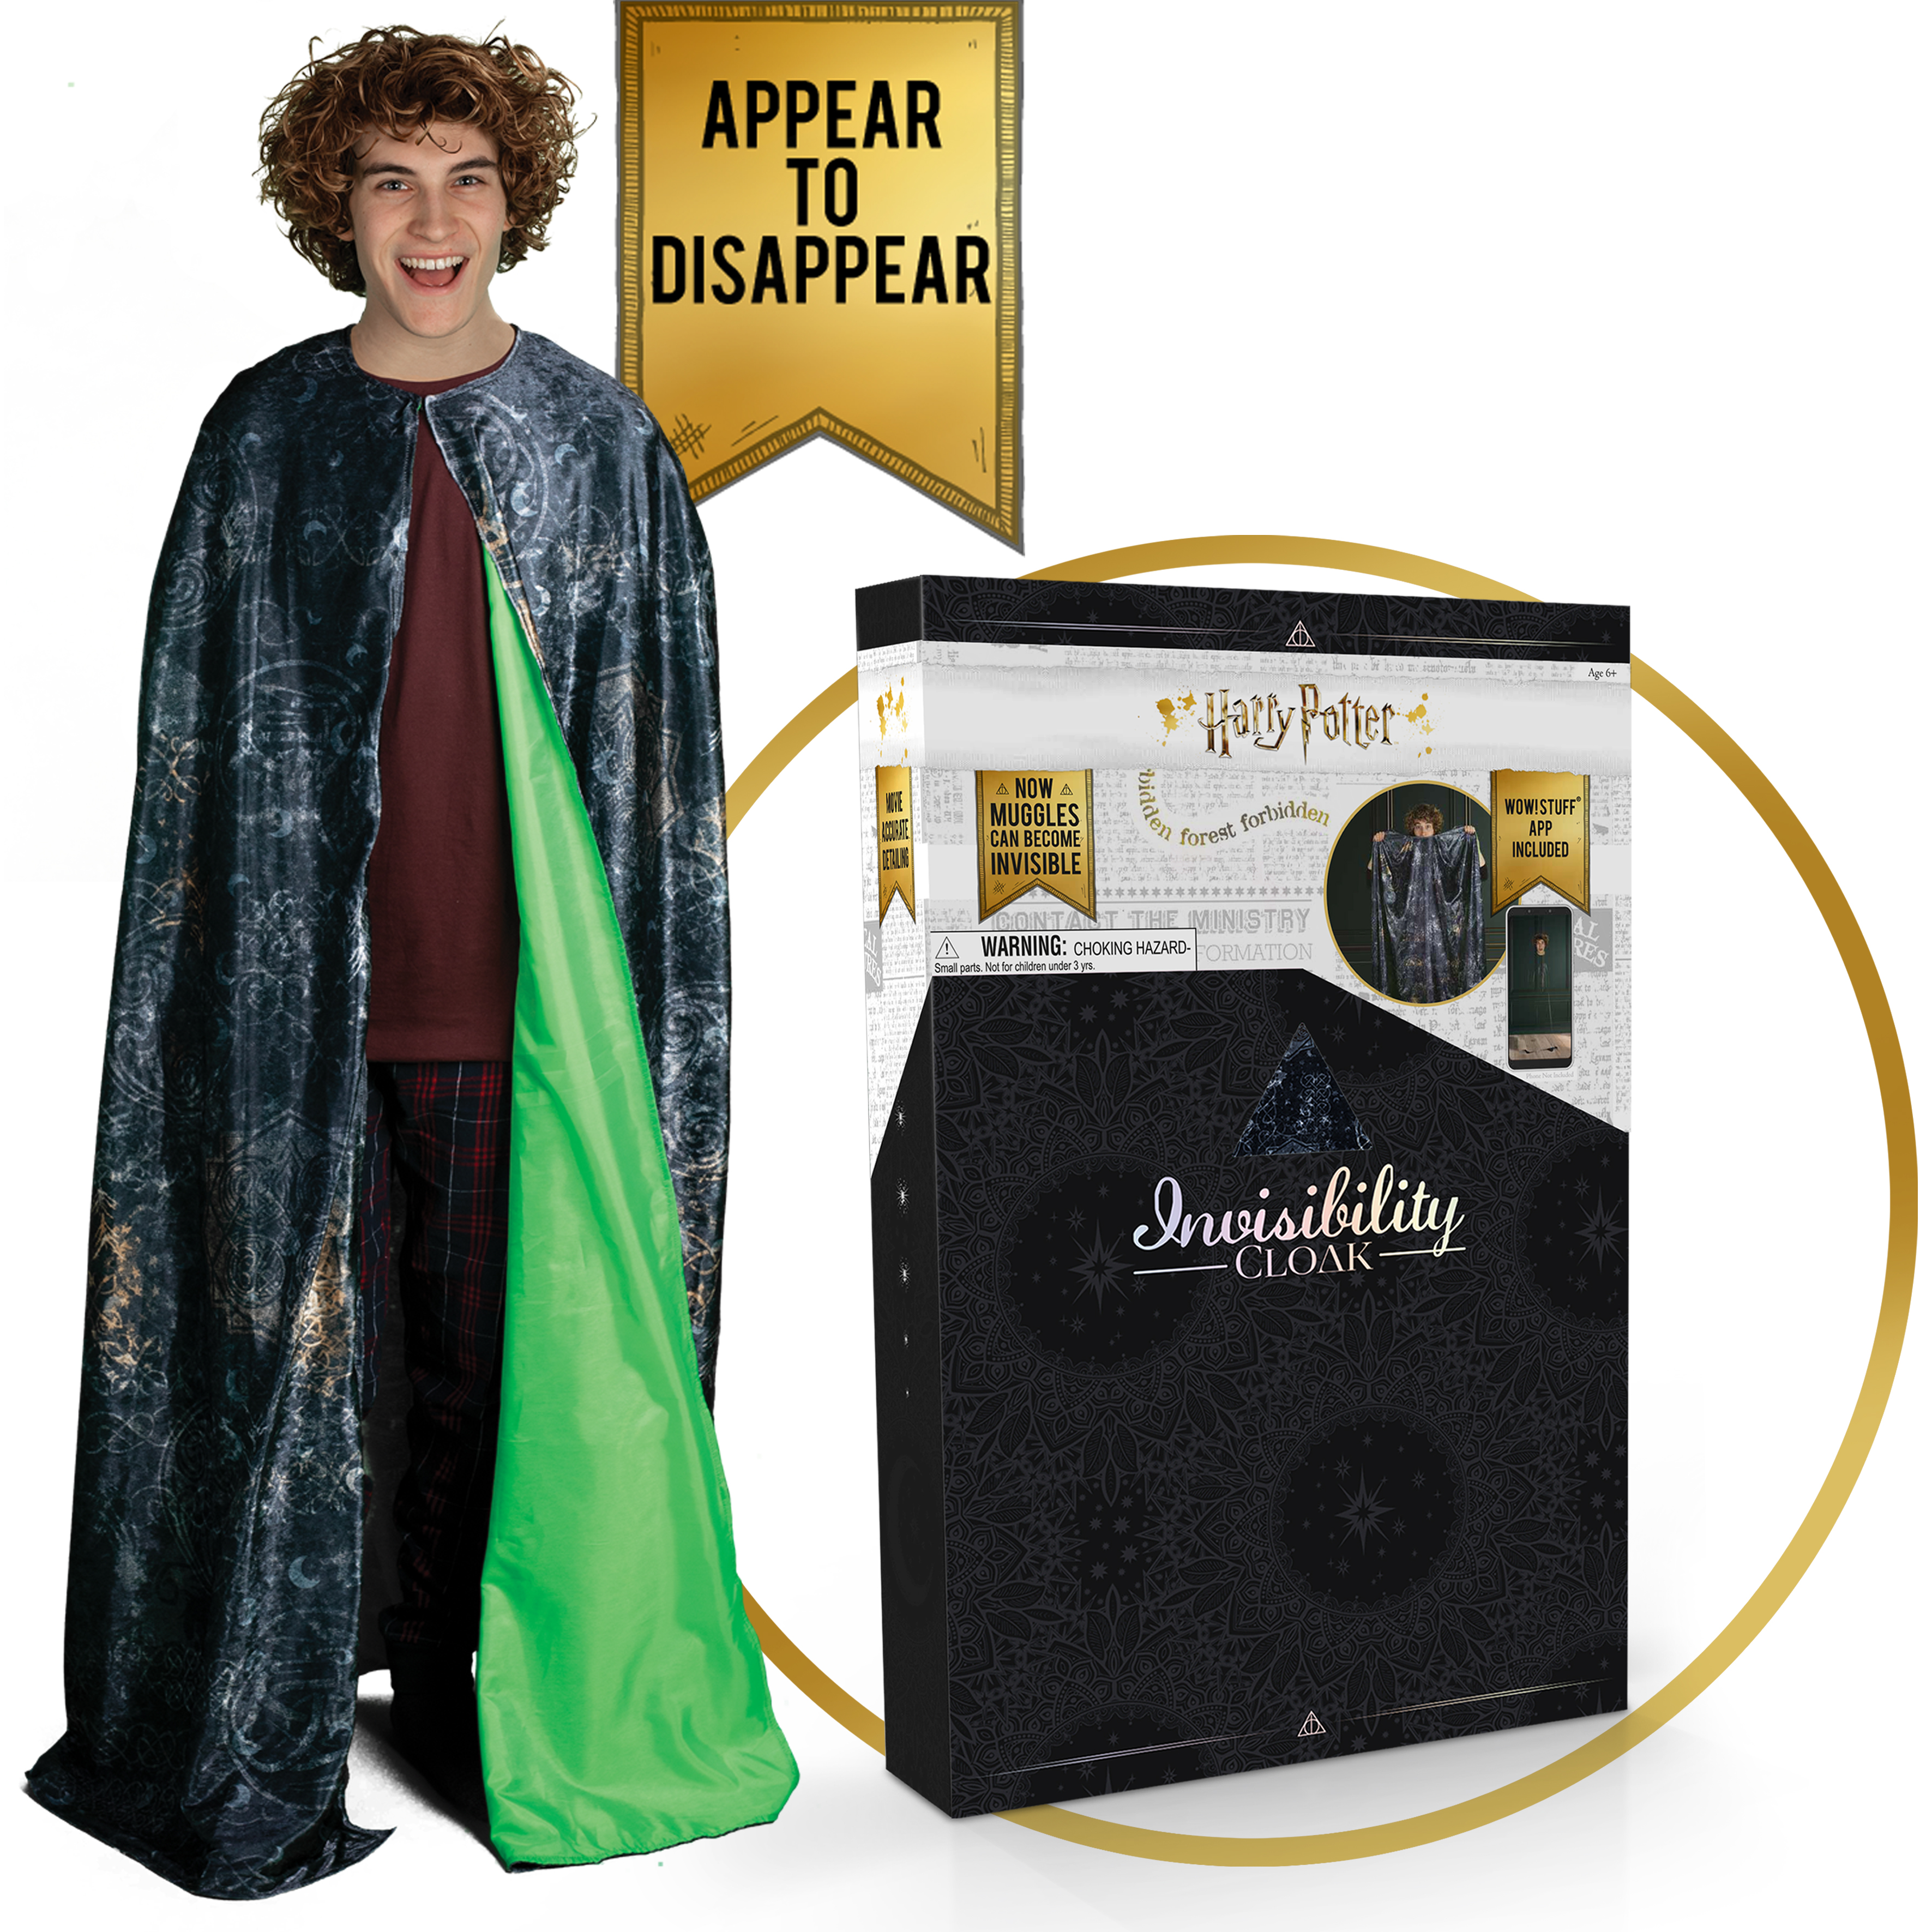 Harry Potter Invisibility Cloak with Exclusive Gift Box Package - image 1 of 11